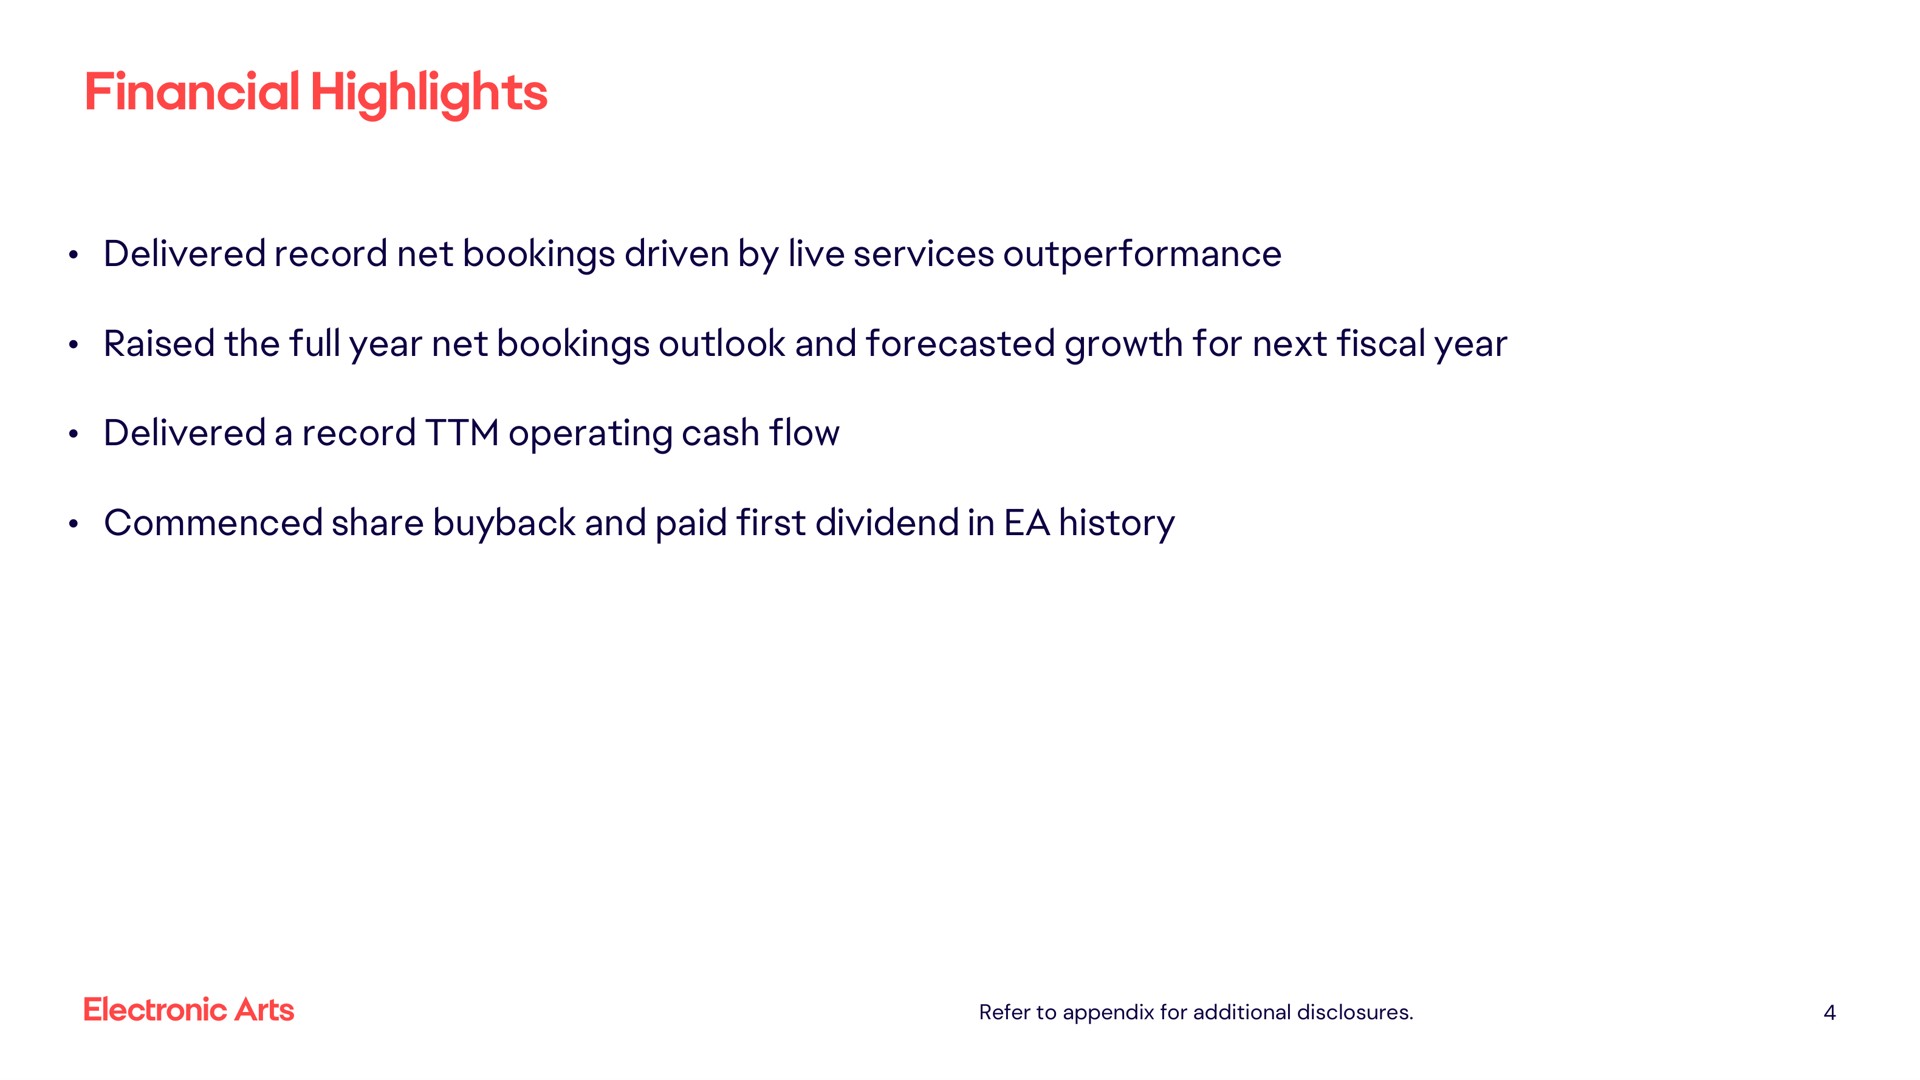 financial highlights delivered record net bookings driven by live services raised the full year net bookings outlook and forecasted growth for next fiscal year delivered a record operating cash flow commenced share and paid first dividend in history | Electronic Arts